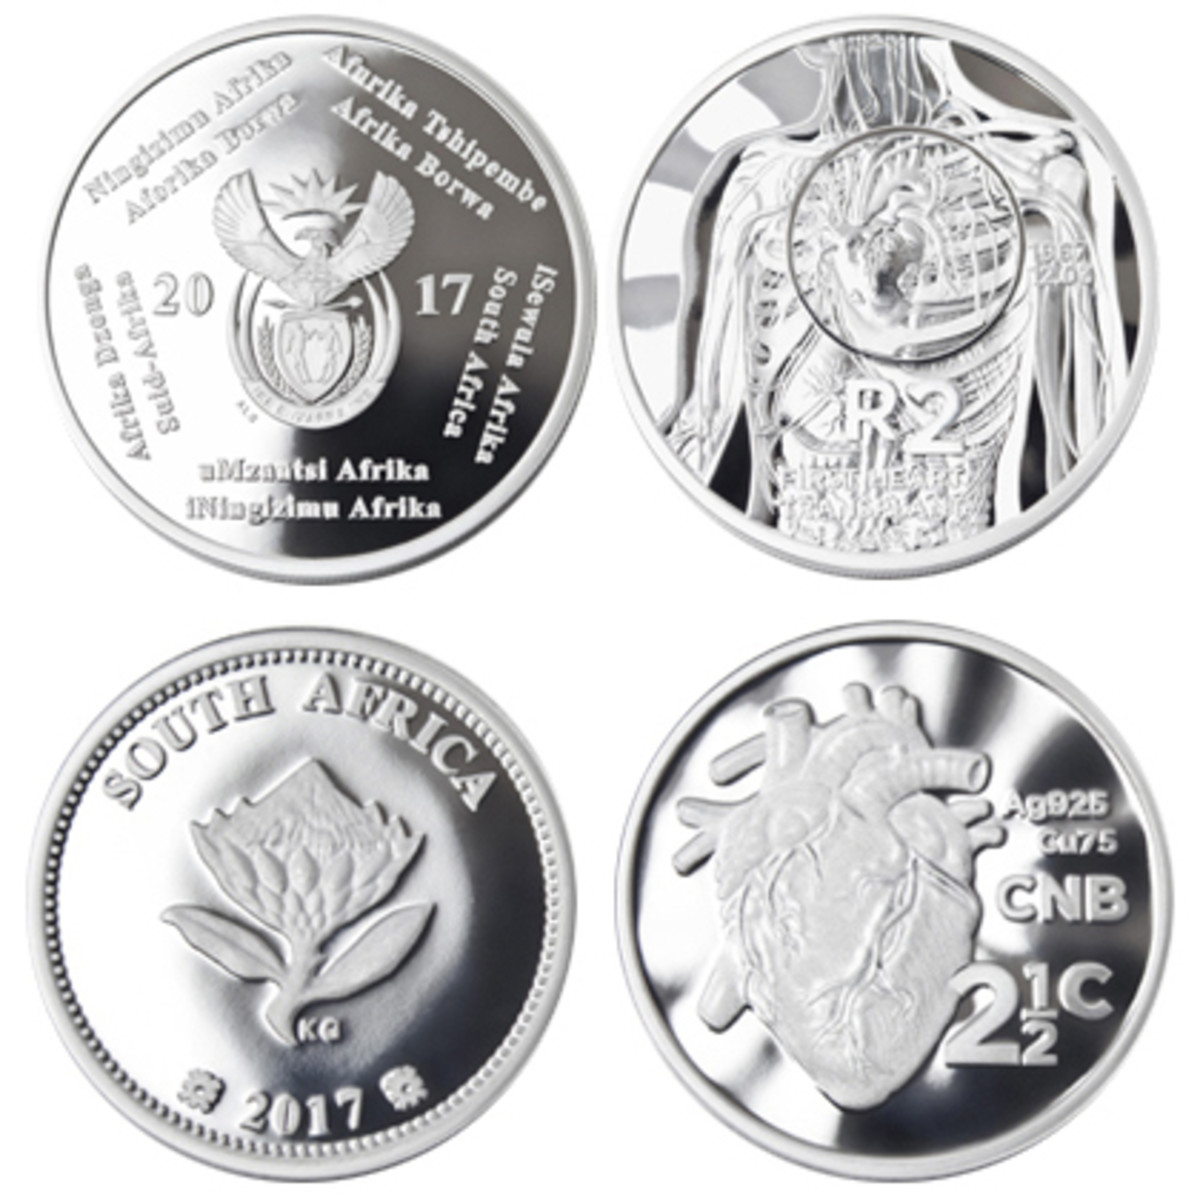  Obverses and reverses of the silver 2 rand and tickey marking the 50th anniversary of the first human-to-human heart transplant. (Images courtesy & © The South African Mint)